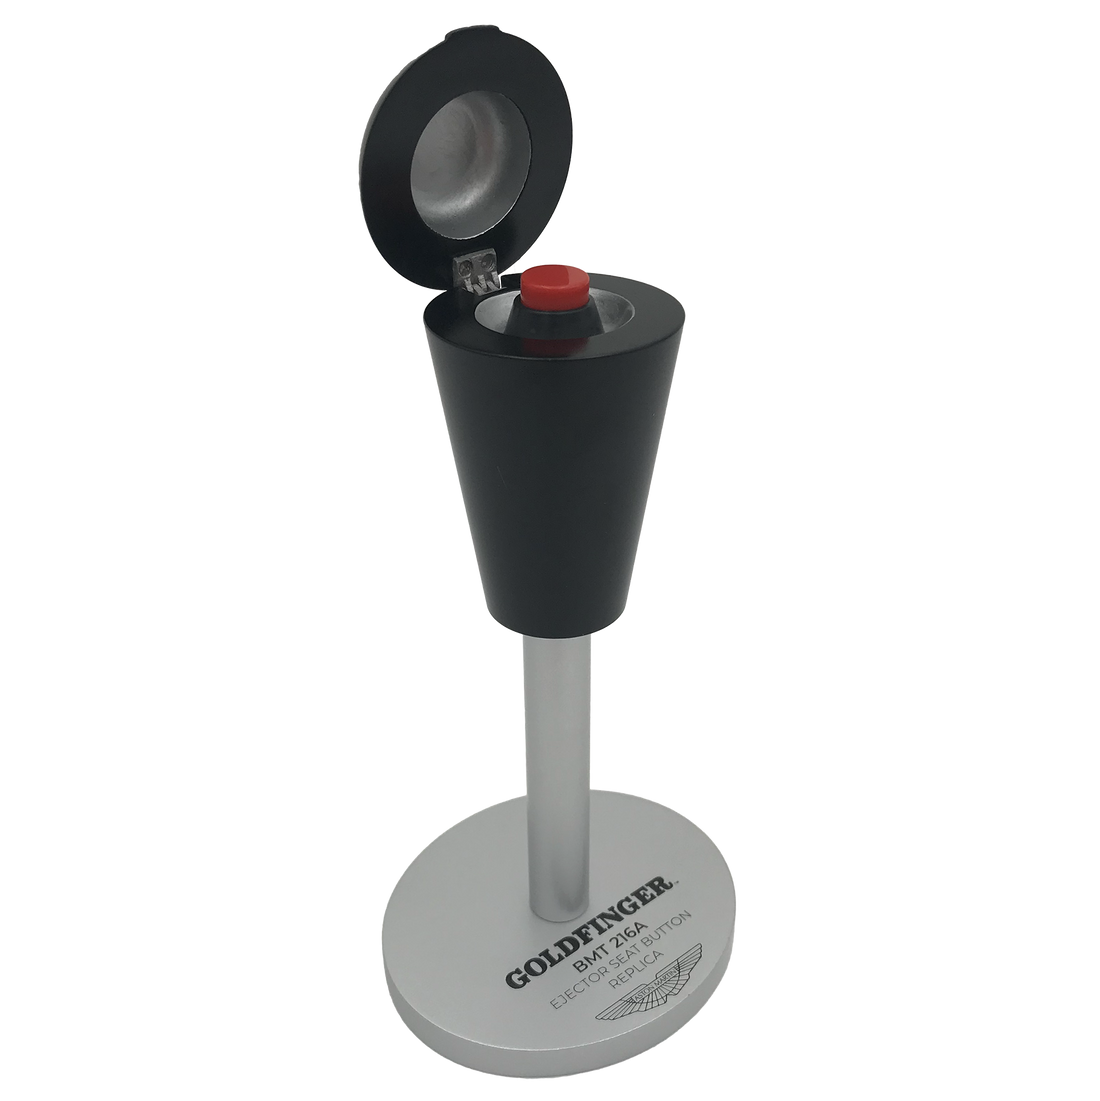 James Bond | Ejector Seat Button Limited Edition Prop Replica